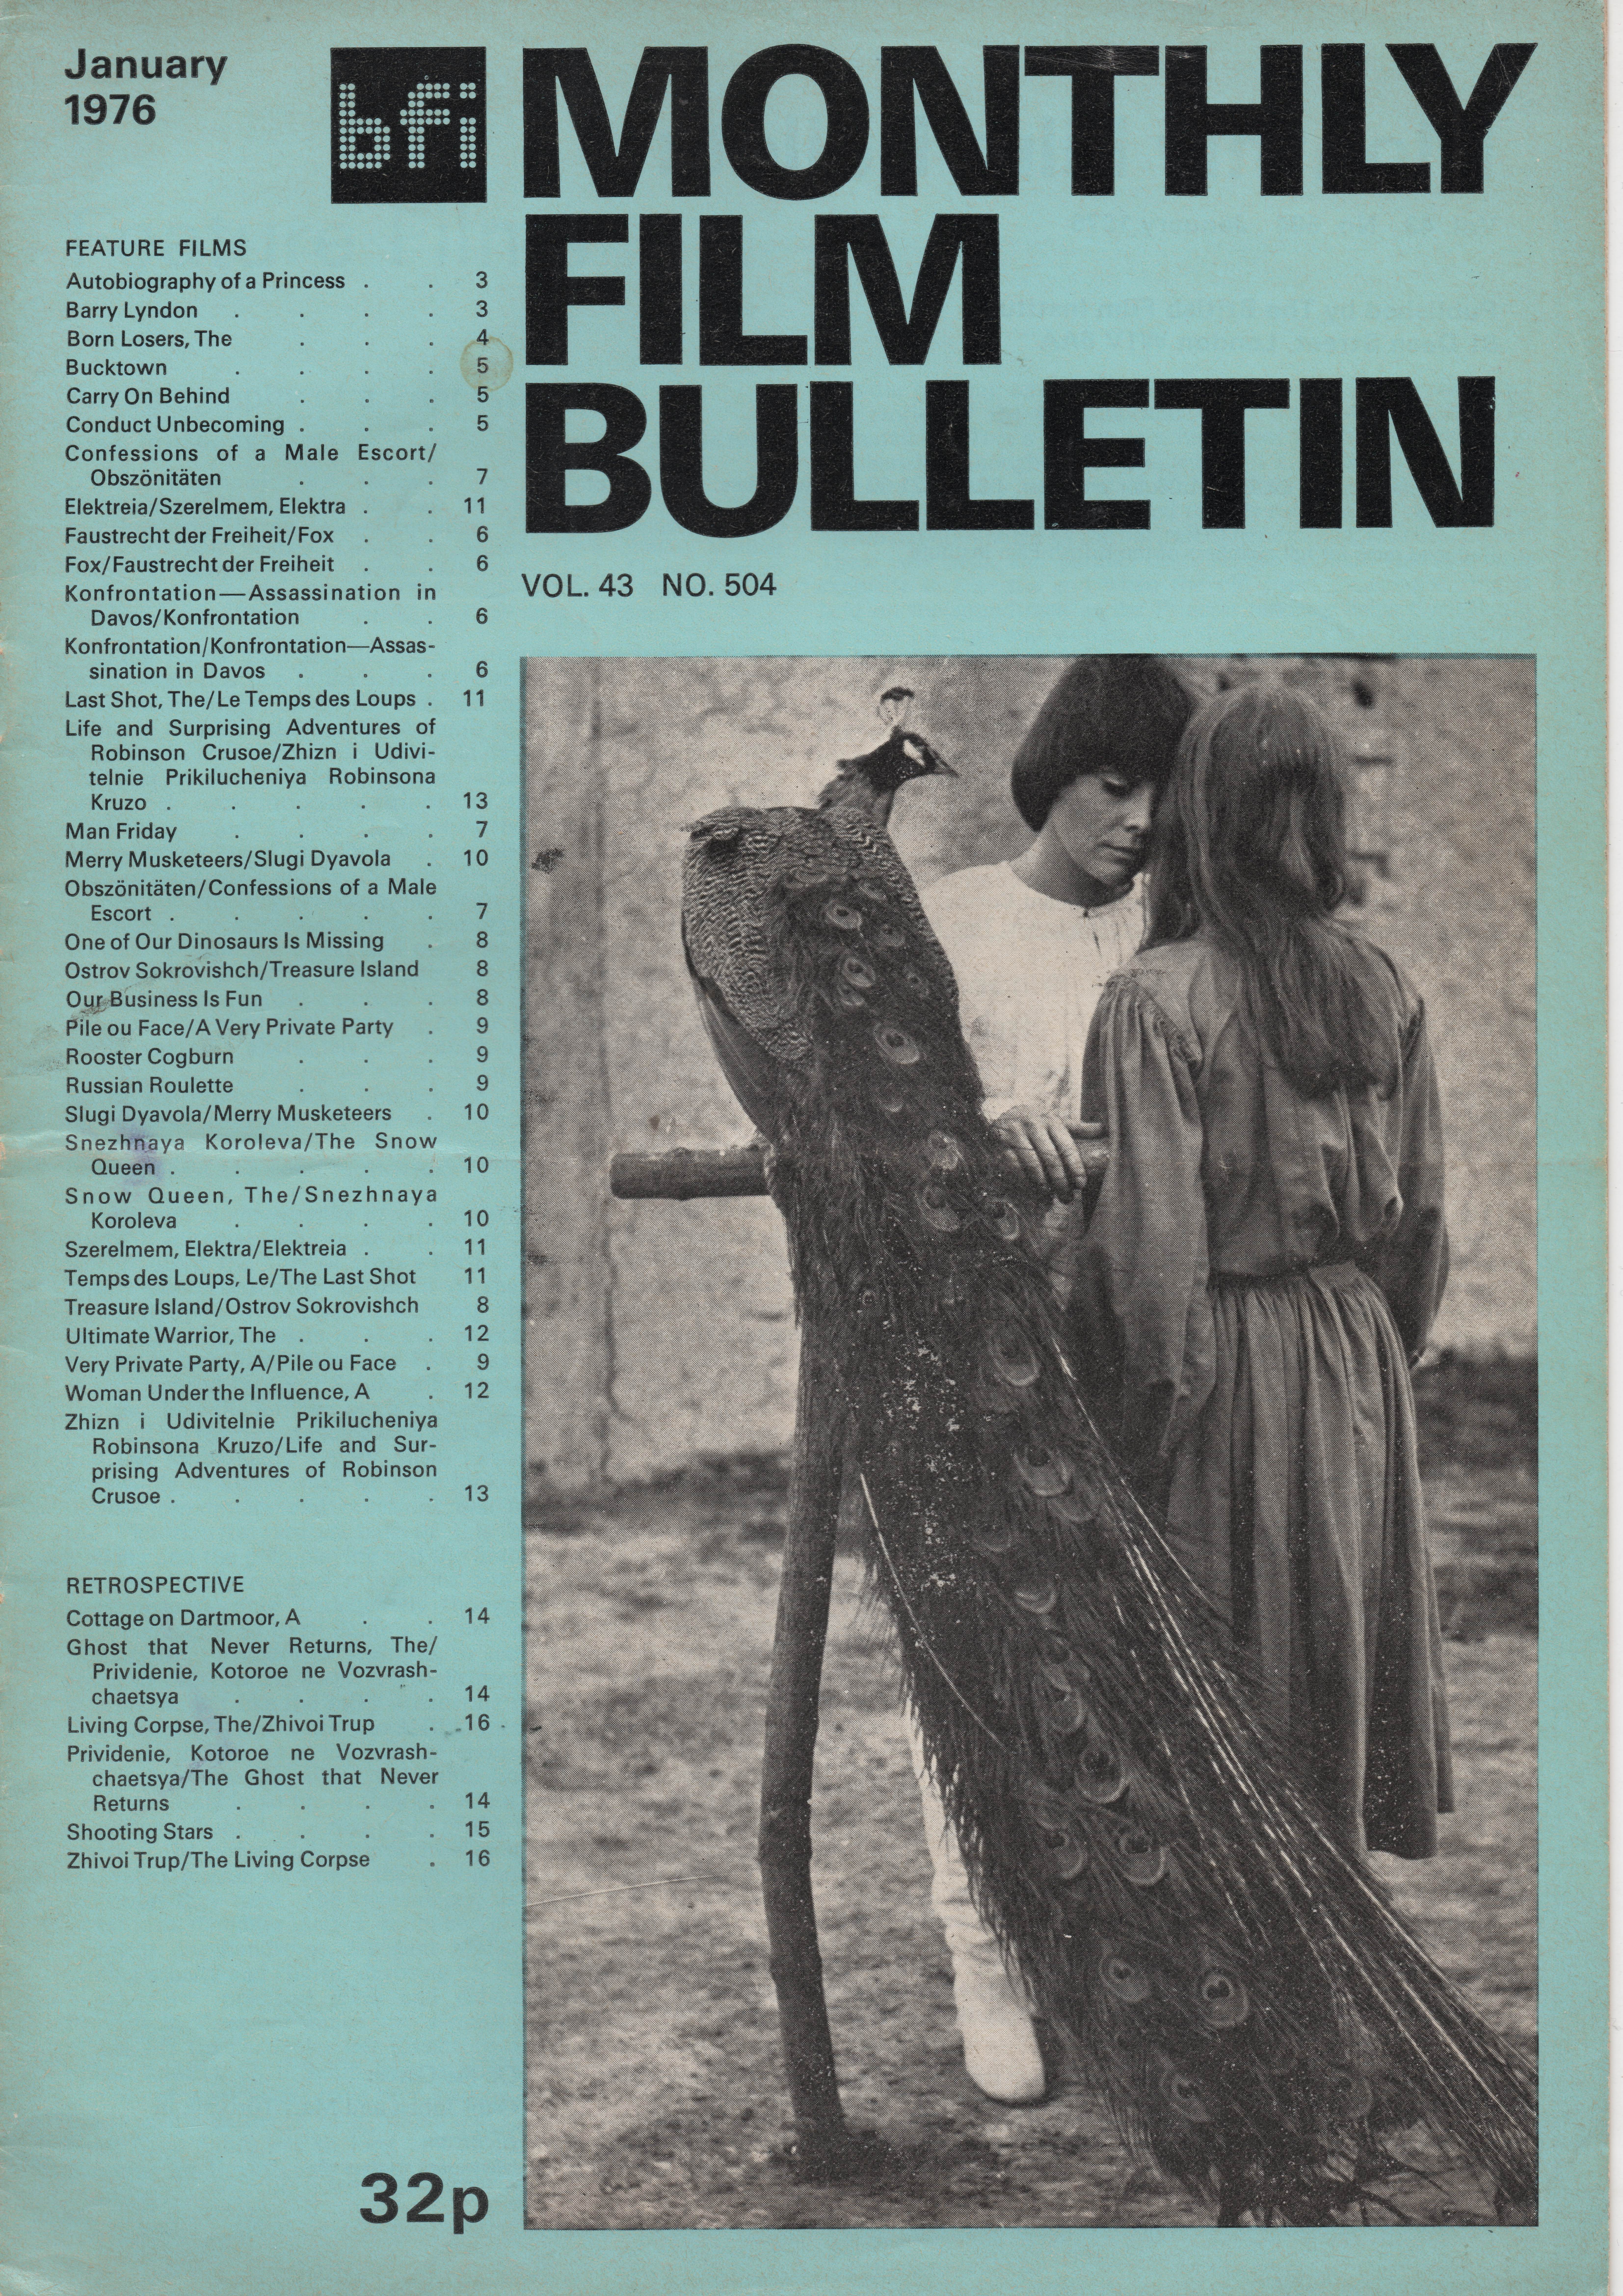 Monthly Film Bulletin Vol.43 No.504 January 1976